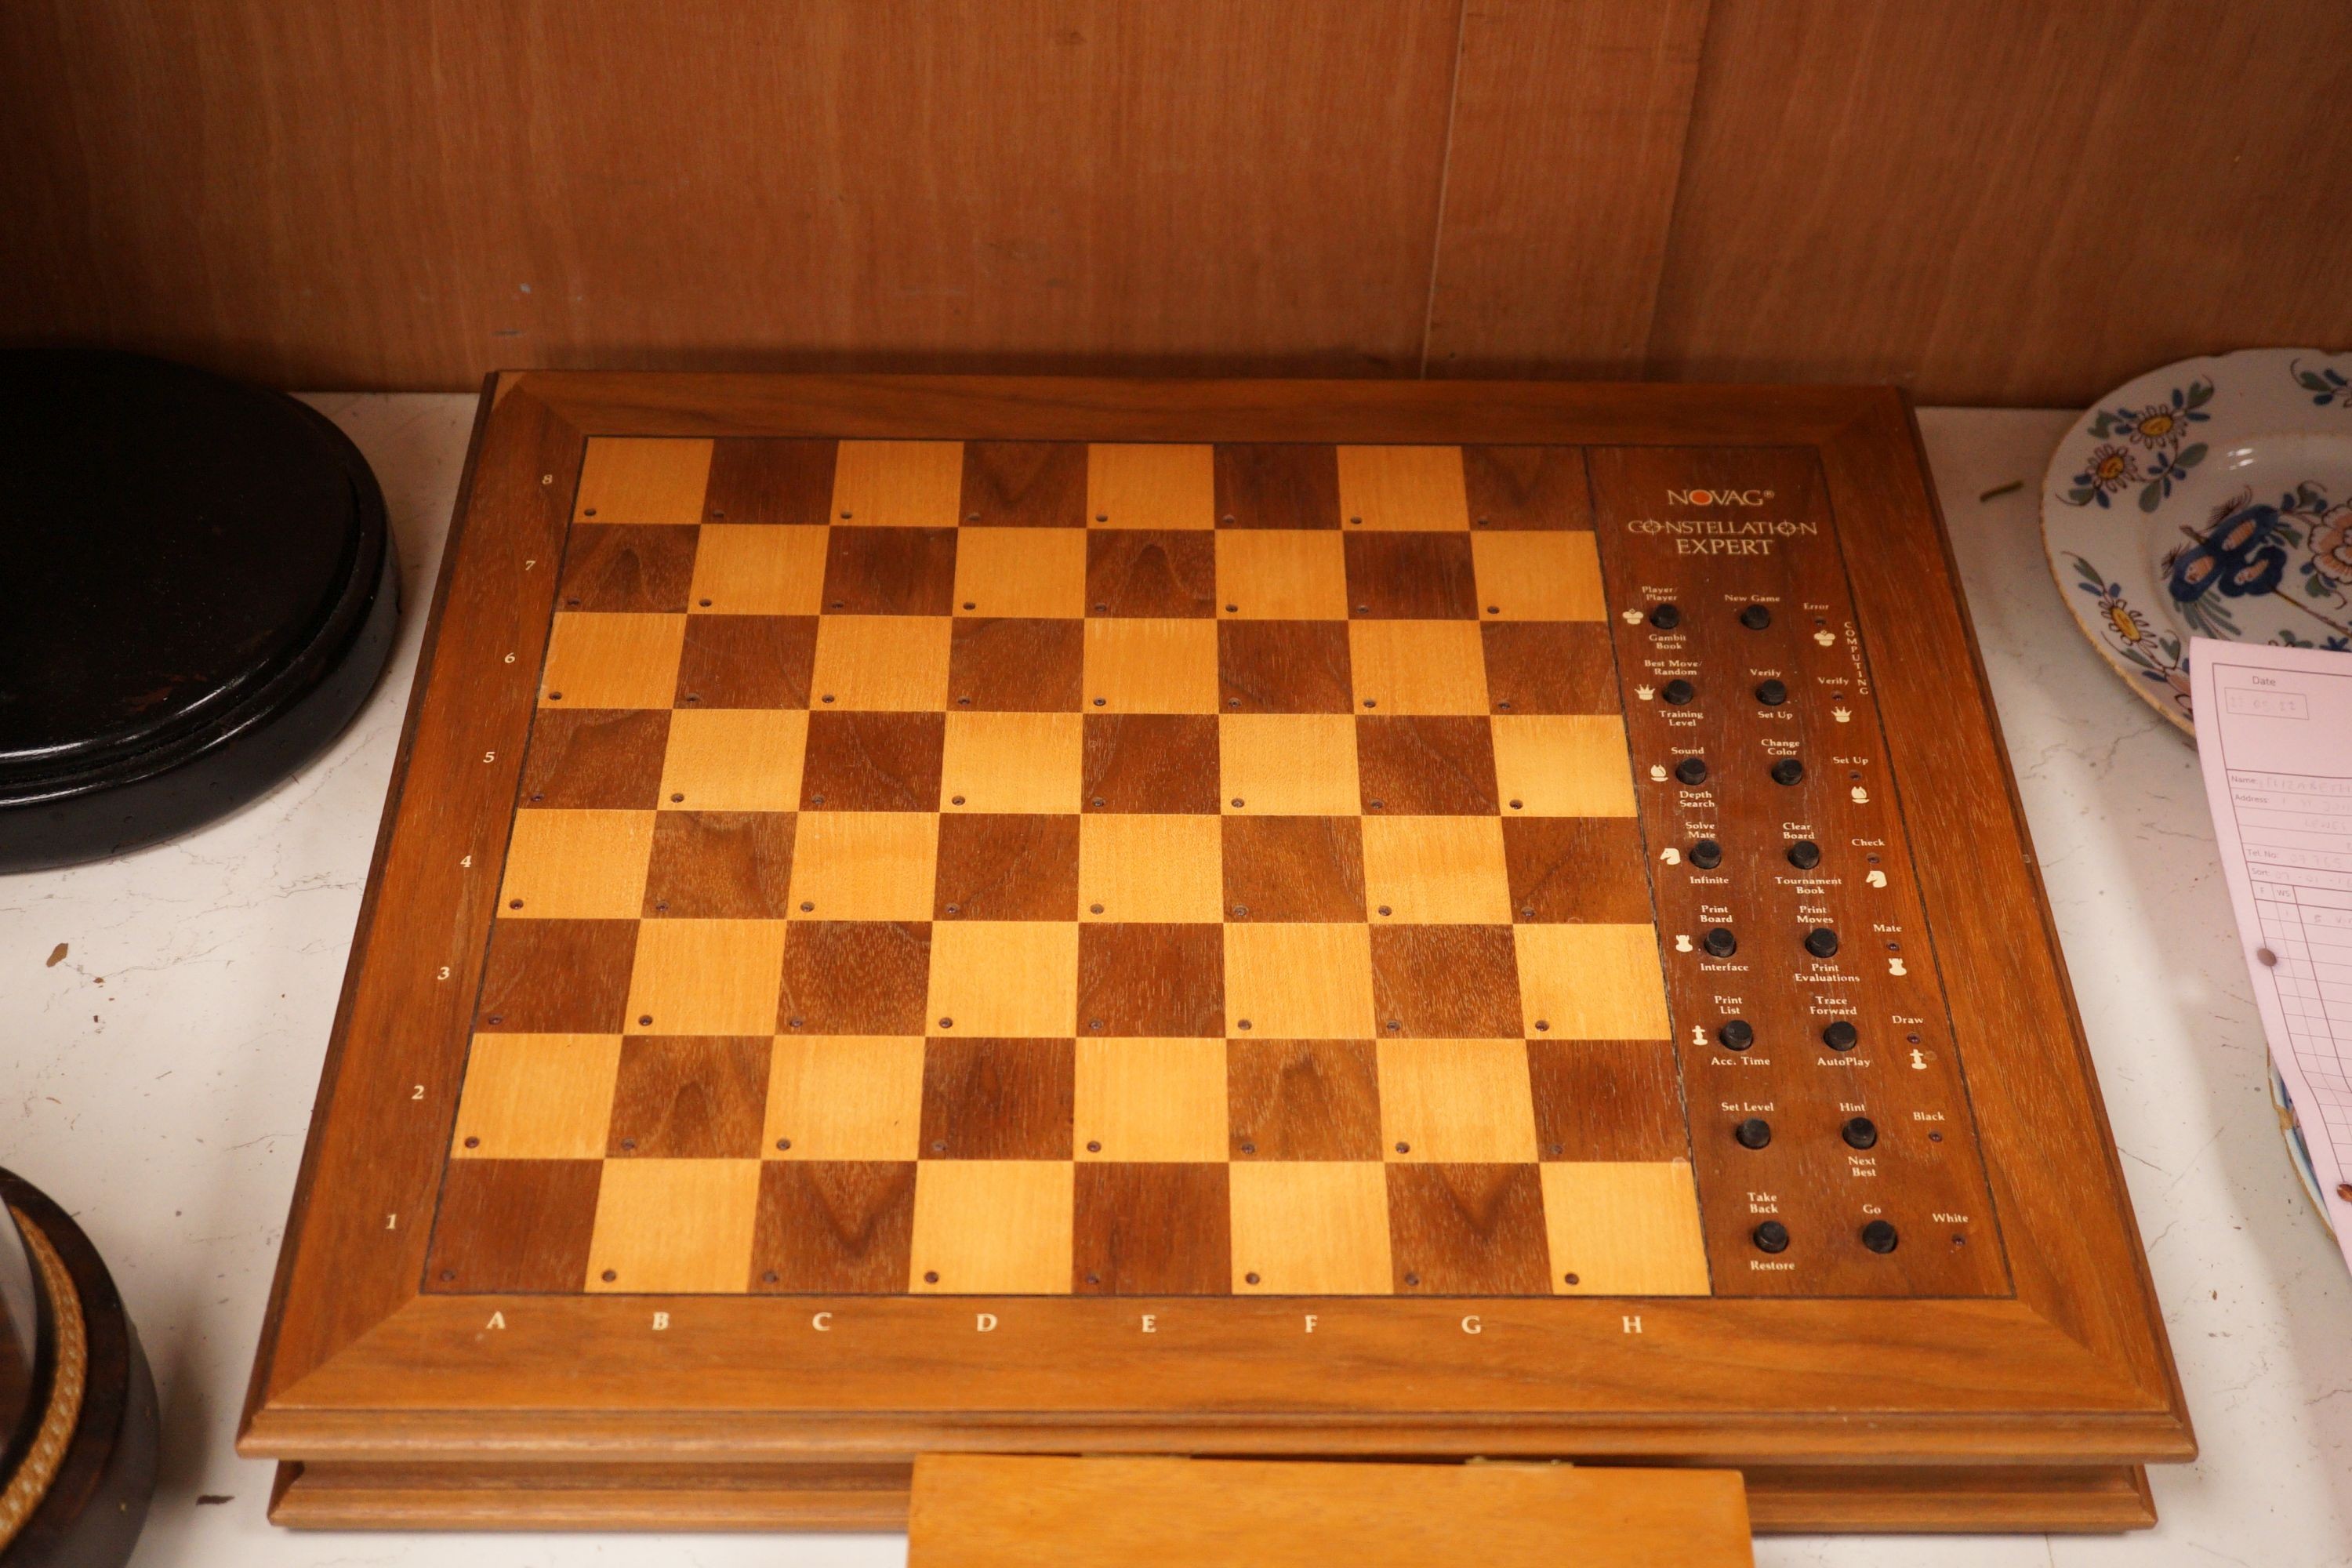 A Novag Constellation Expert electronic chess set with turned wood pieces - Image 2 of 5